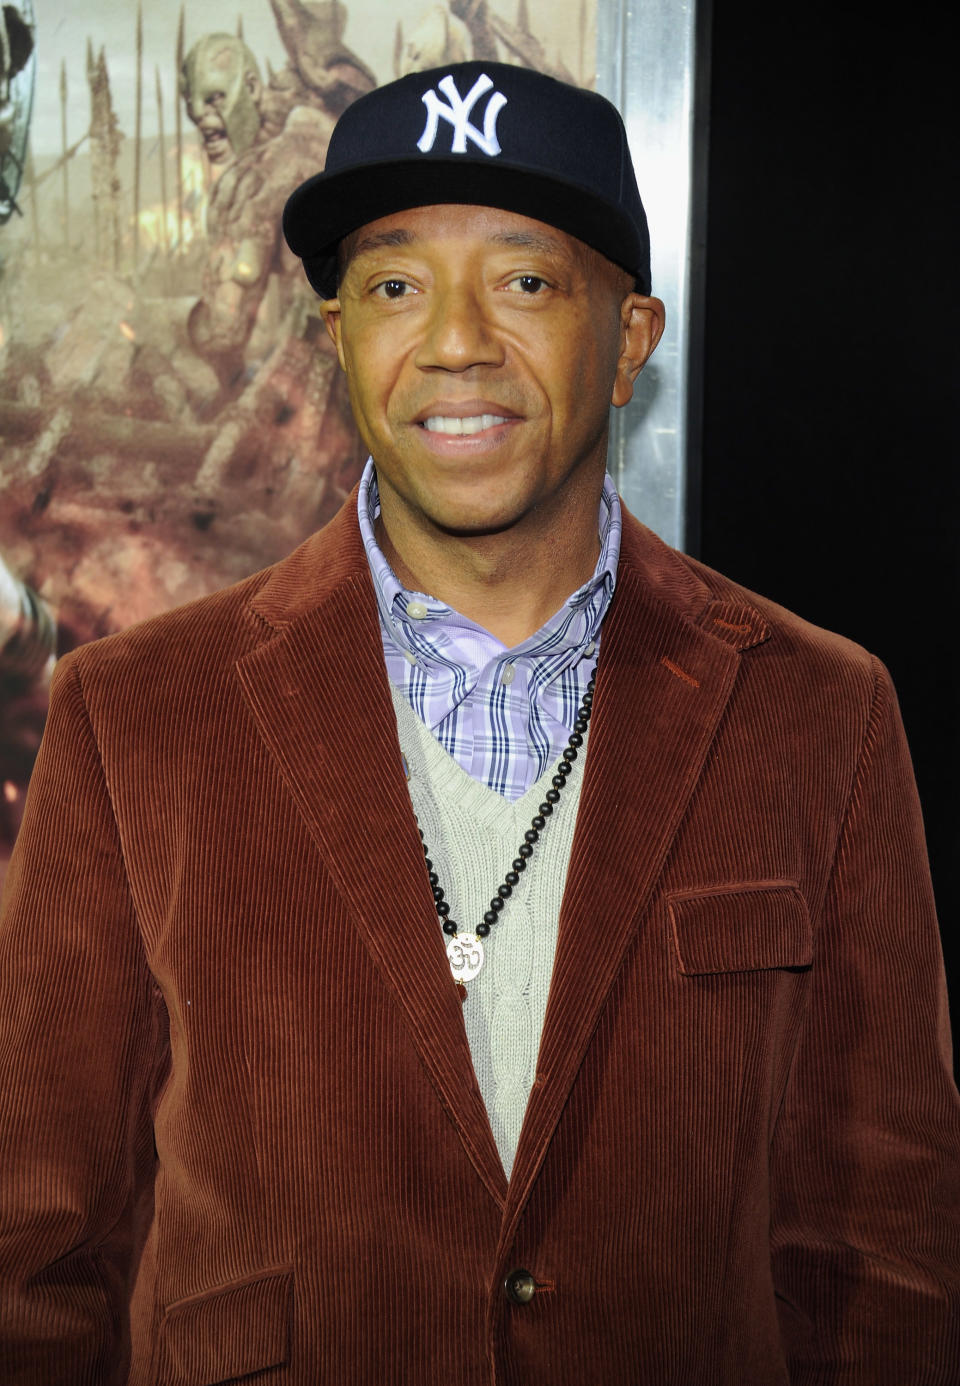 NEW YORK, NY - MARCH 26: Russell Simmons attends the "Wrath of the Titans" premiere at the AMC Lincoln Square Theater on March 26, 2012 in New York City. (Photo by Larry Busacca/Getty Images)